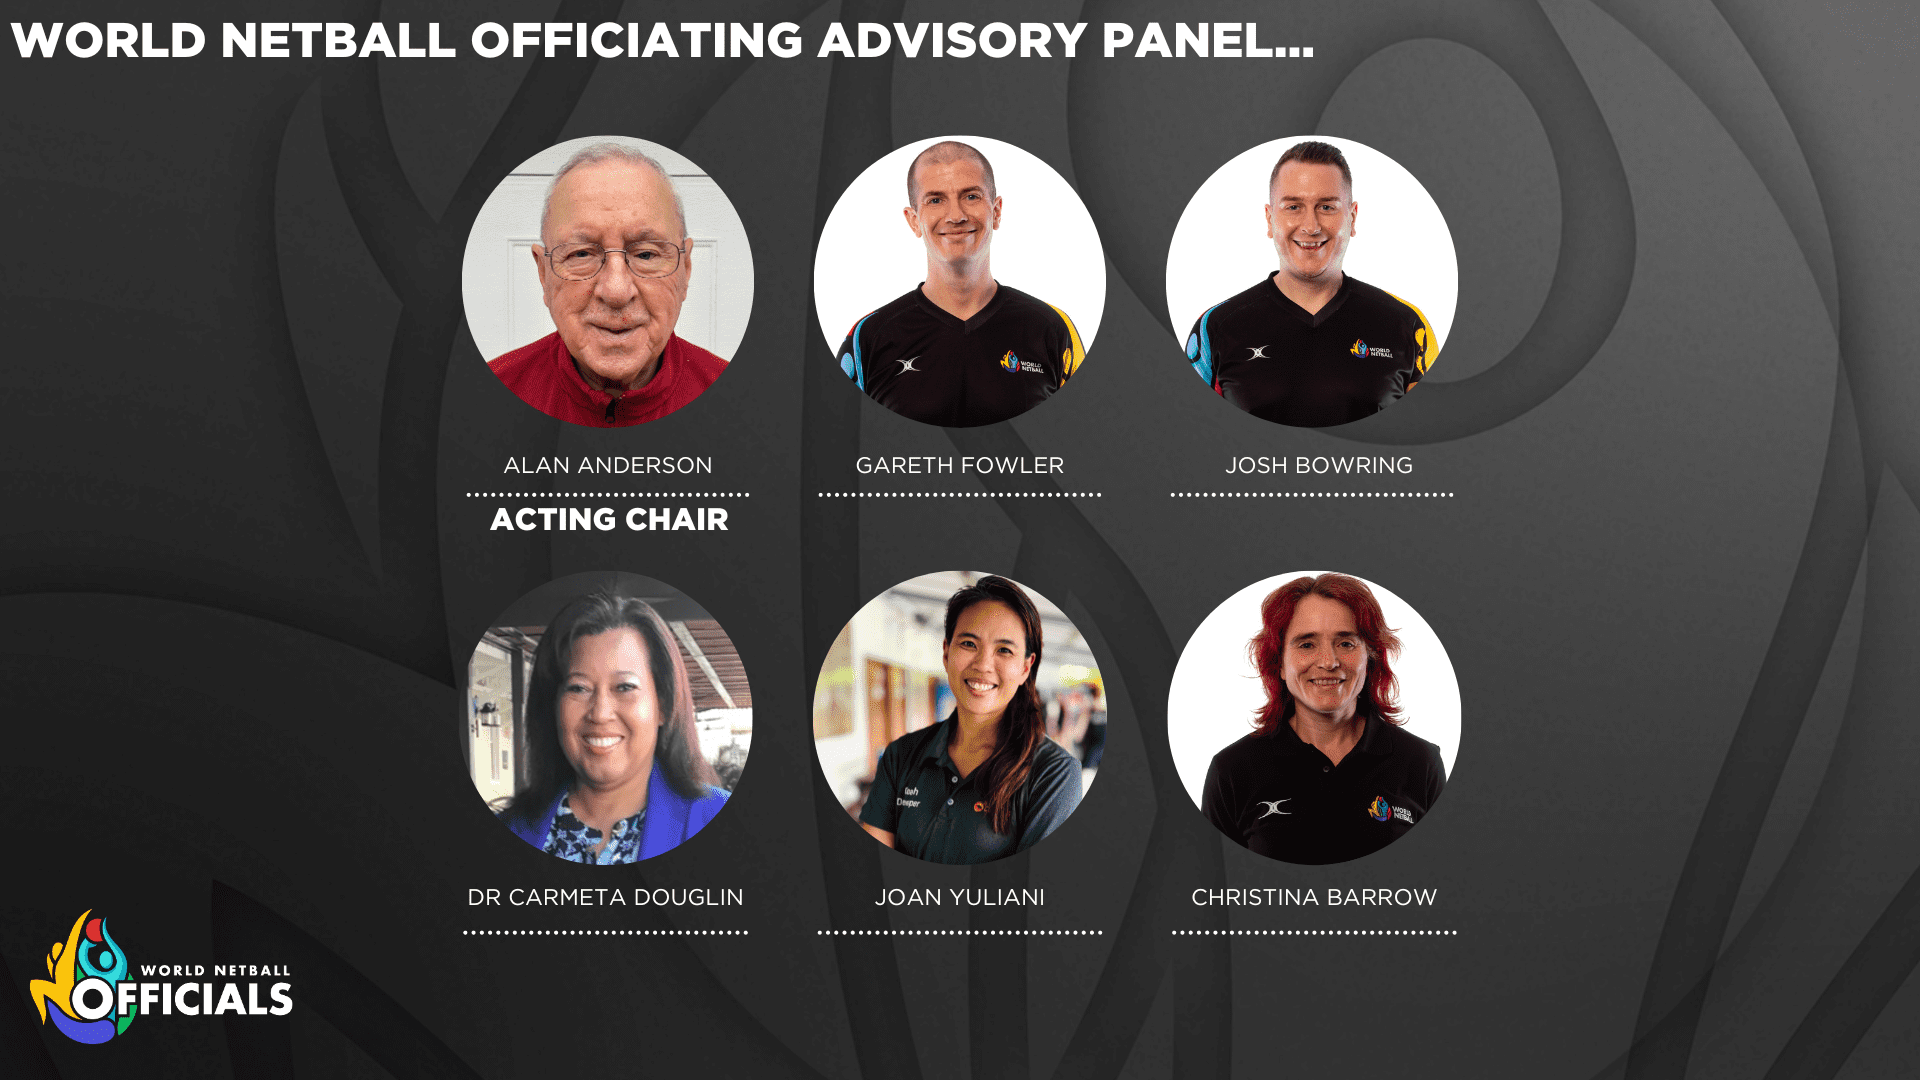 Alan Anderson Becomes Acting Officiating Advisory Panel Chair